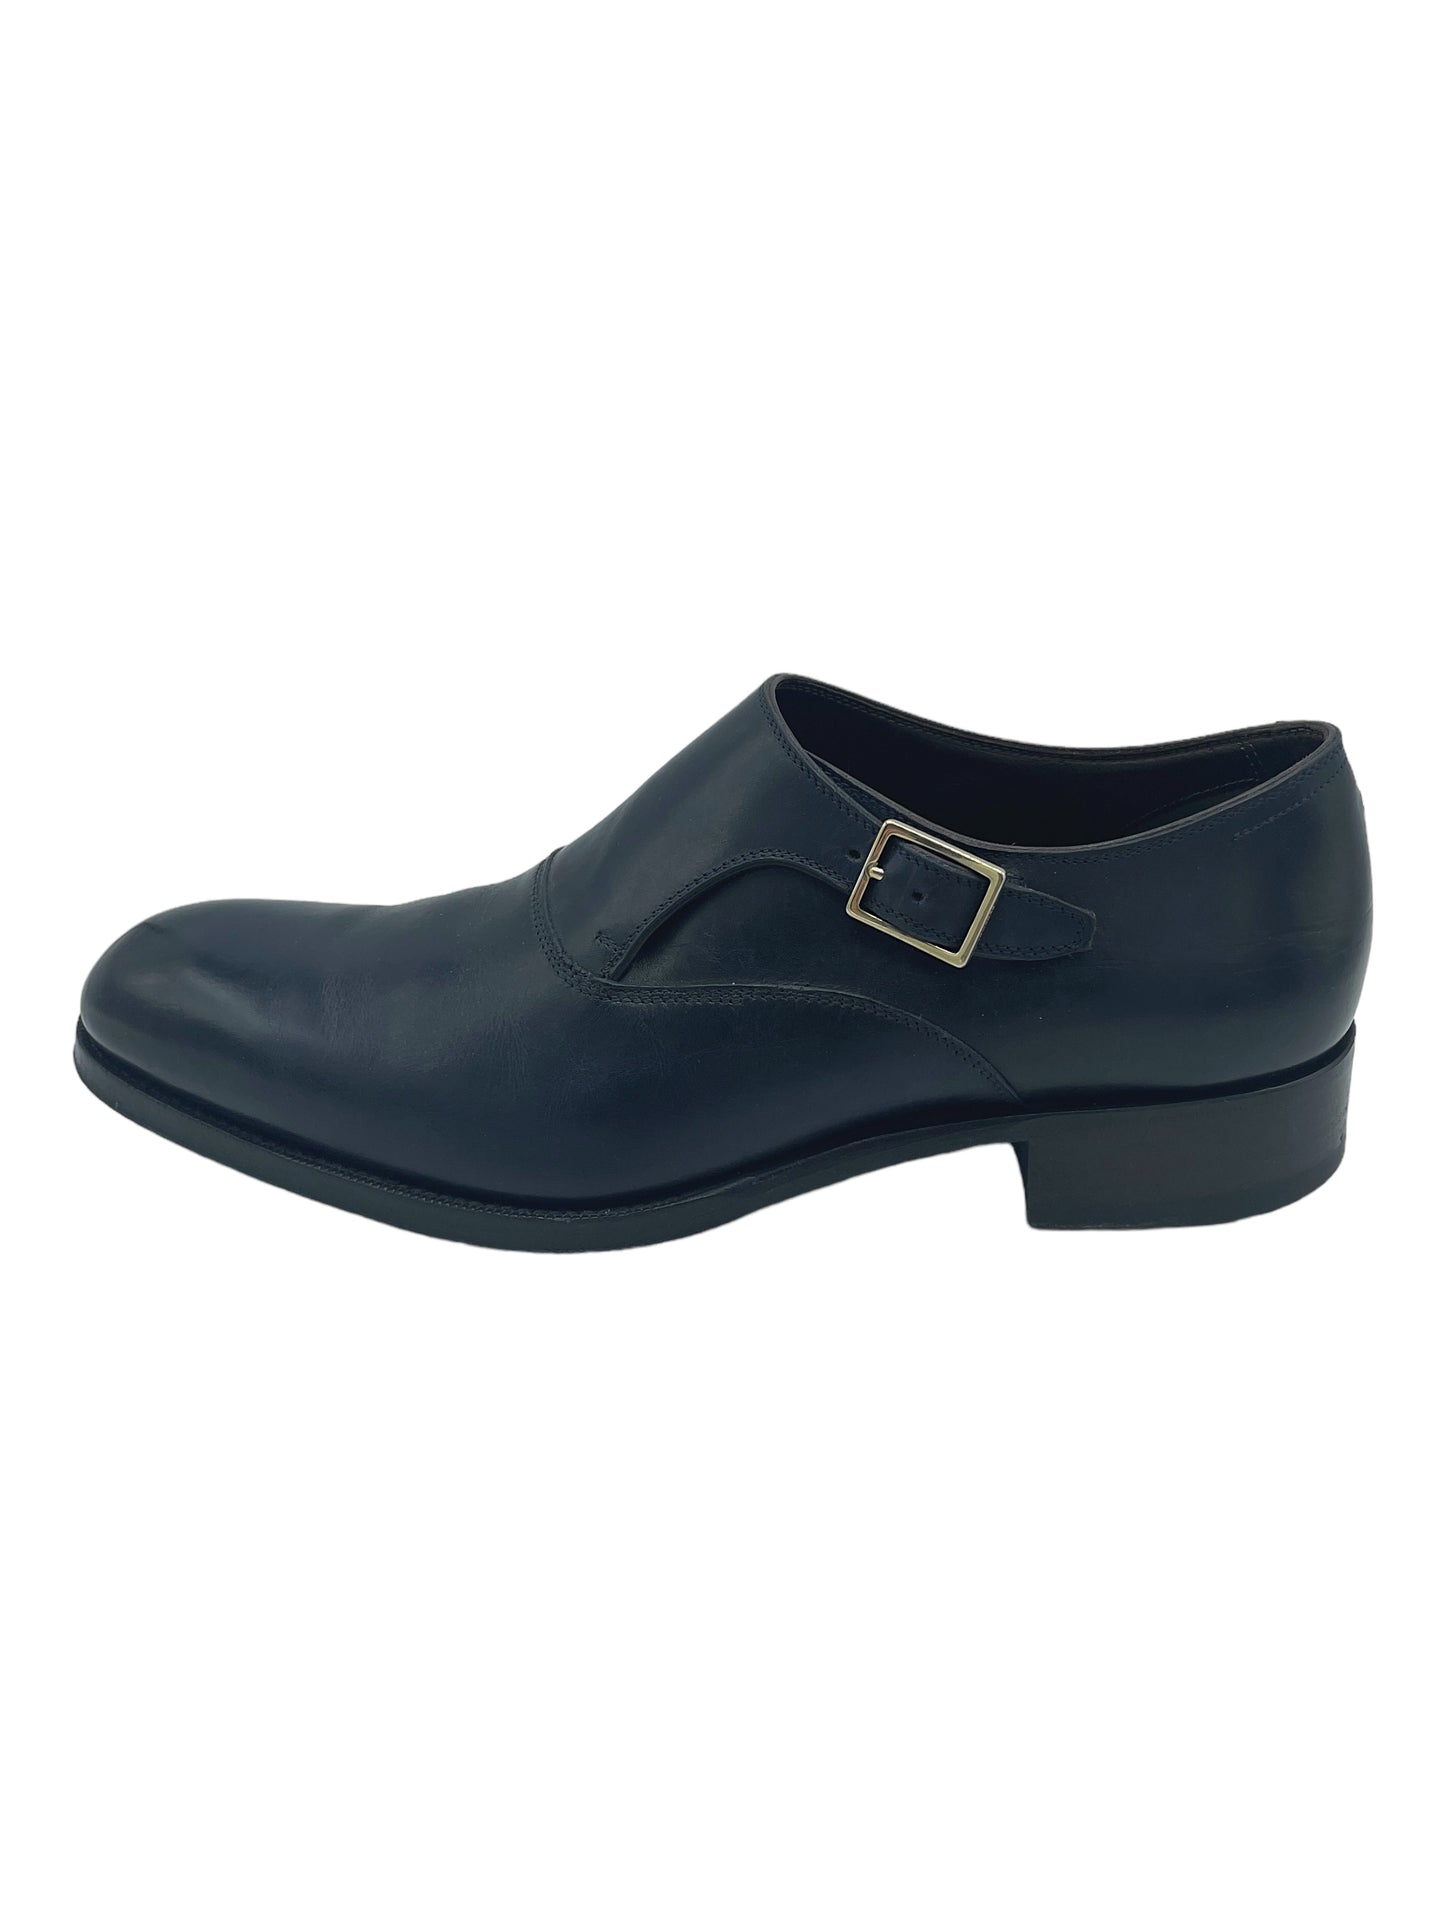 Tom Ford Blue Leather Single Monk Strap Dress Shoes